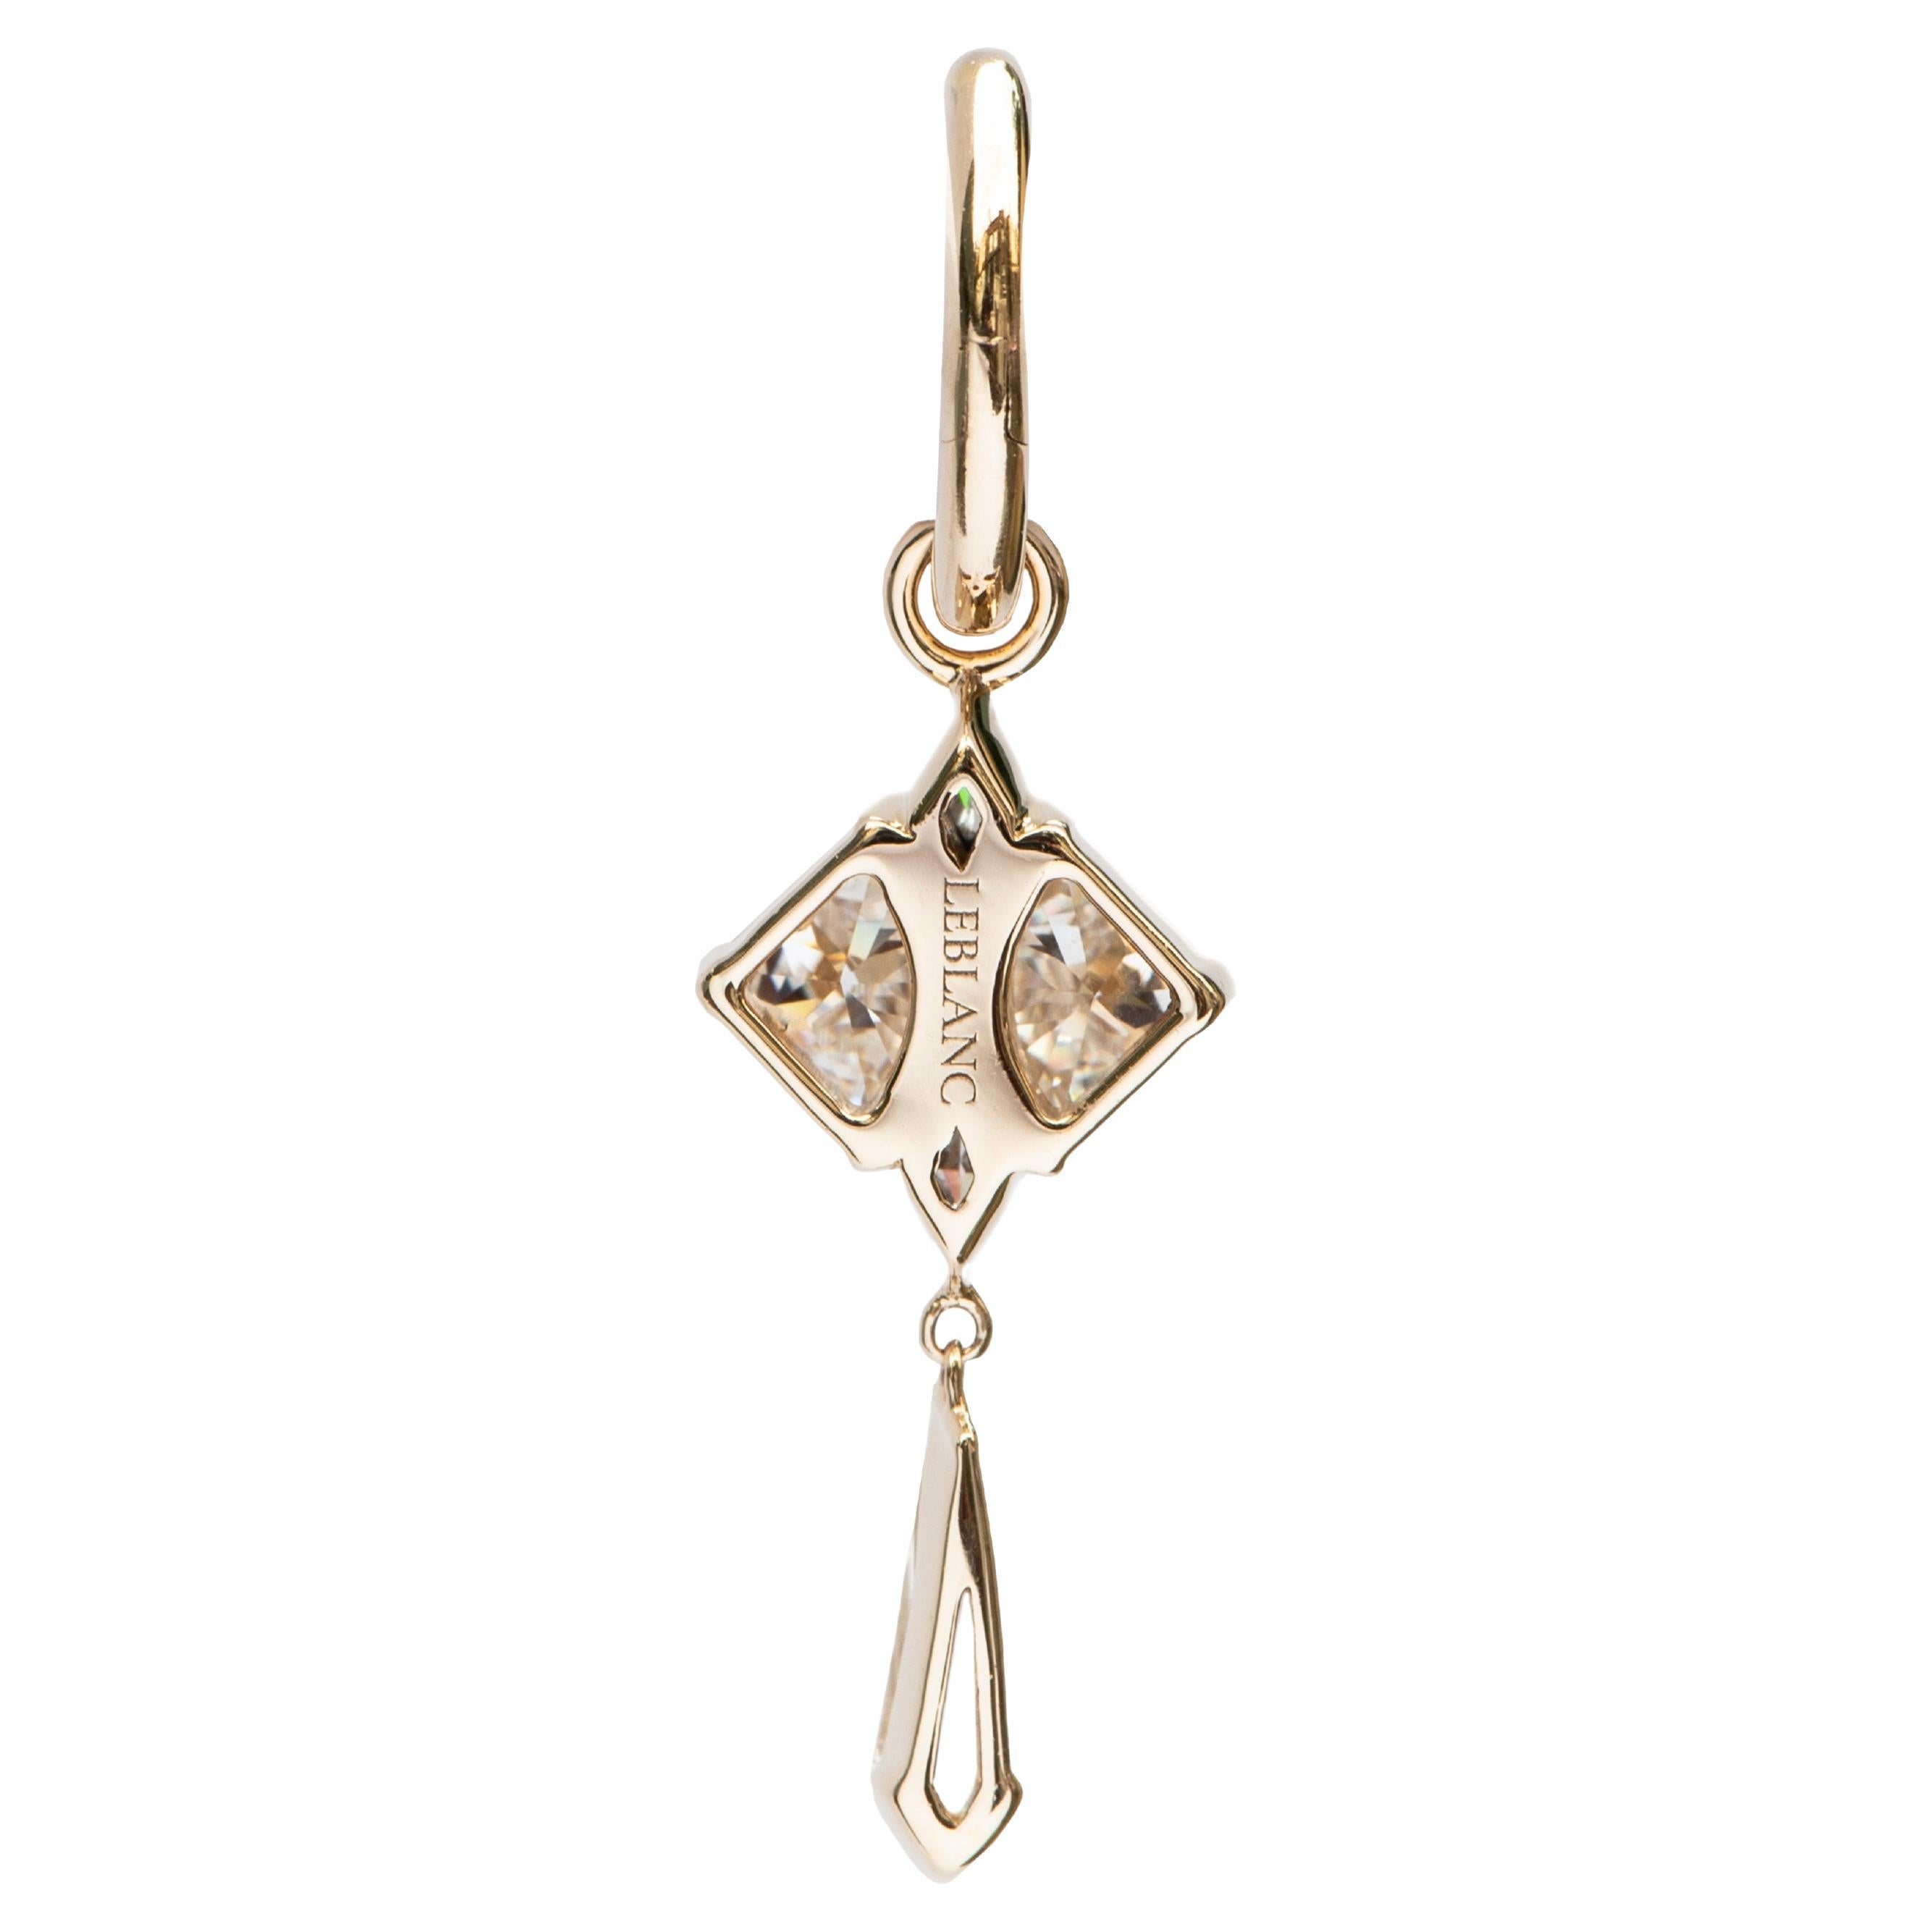 The magnificent eagle ray never fails to inspire us. A symbol of wisdom and grace, this elegant creature is a spirit guardian. Directly inspired by the ray’s form, the earrings are crafted with an assortment of fancy cut moissanite. A celebration of